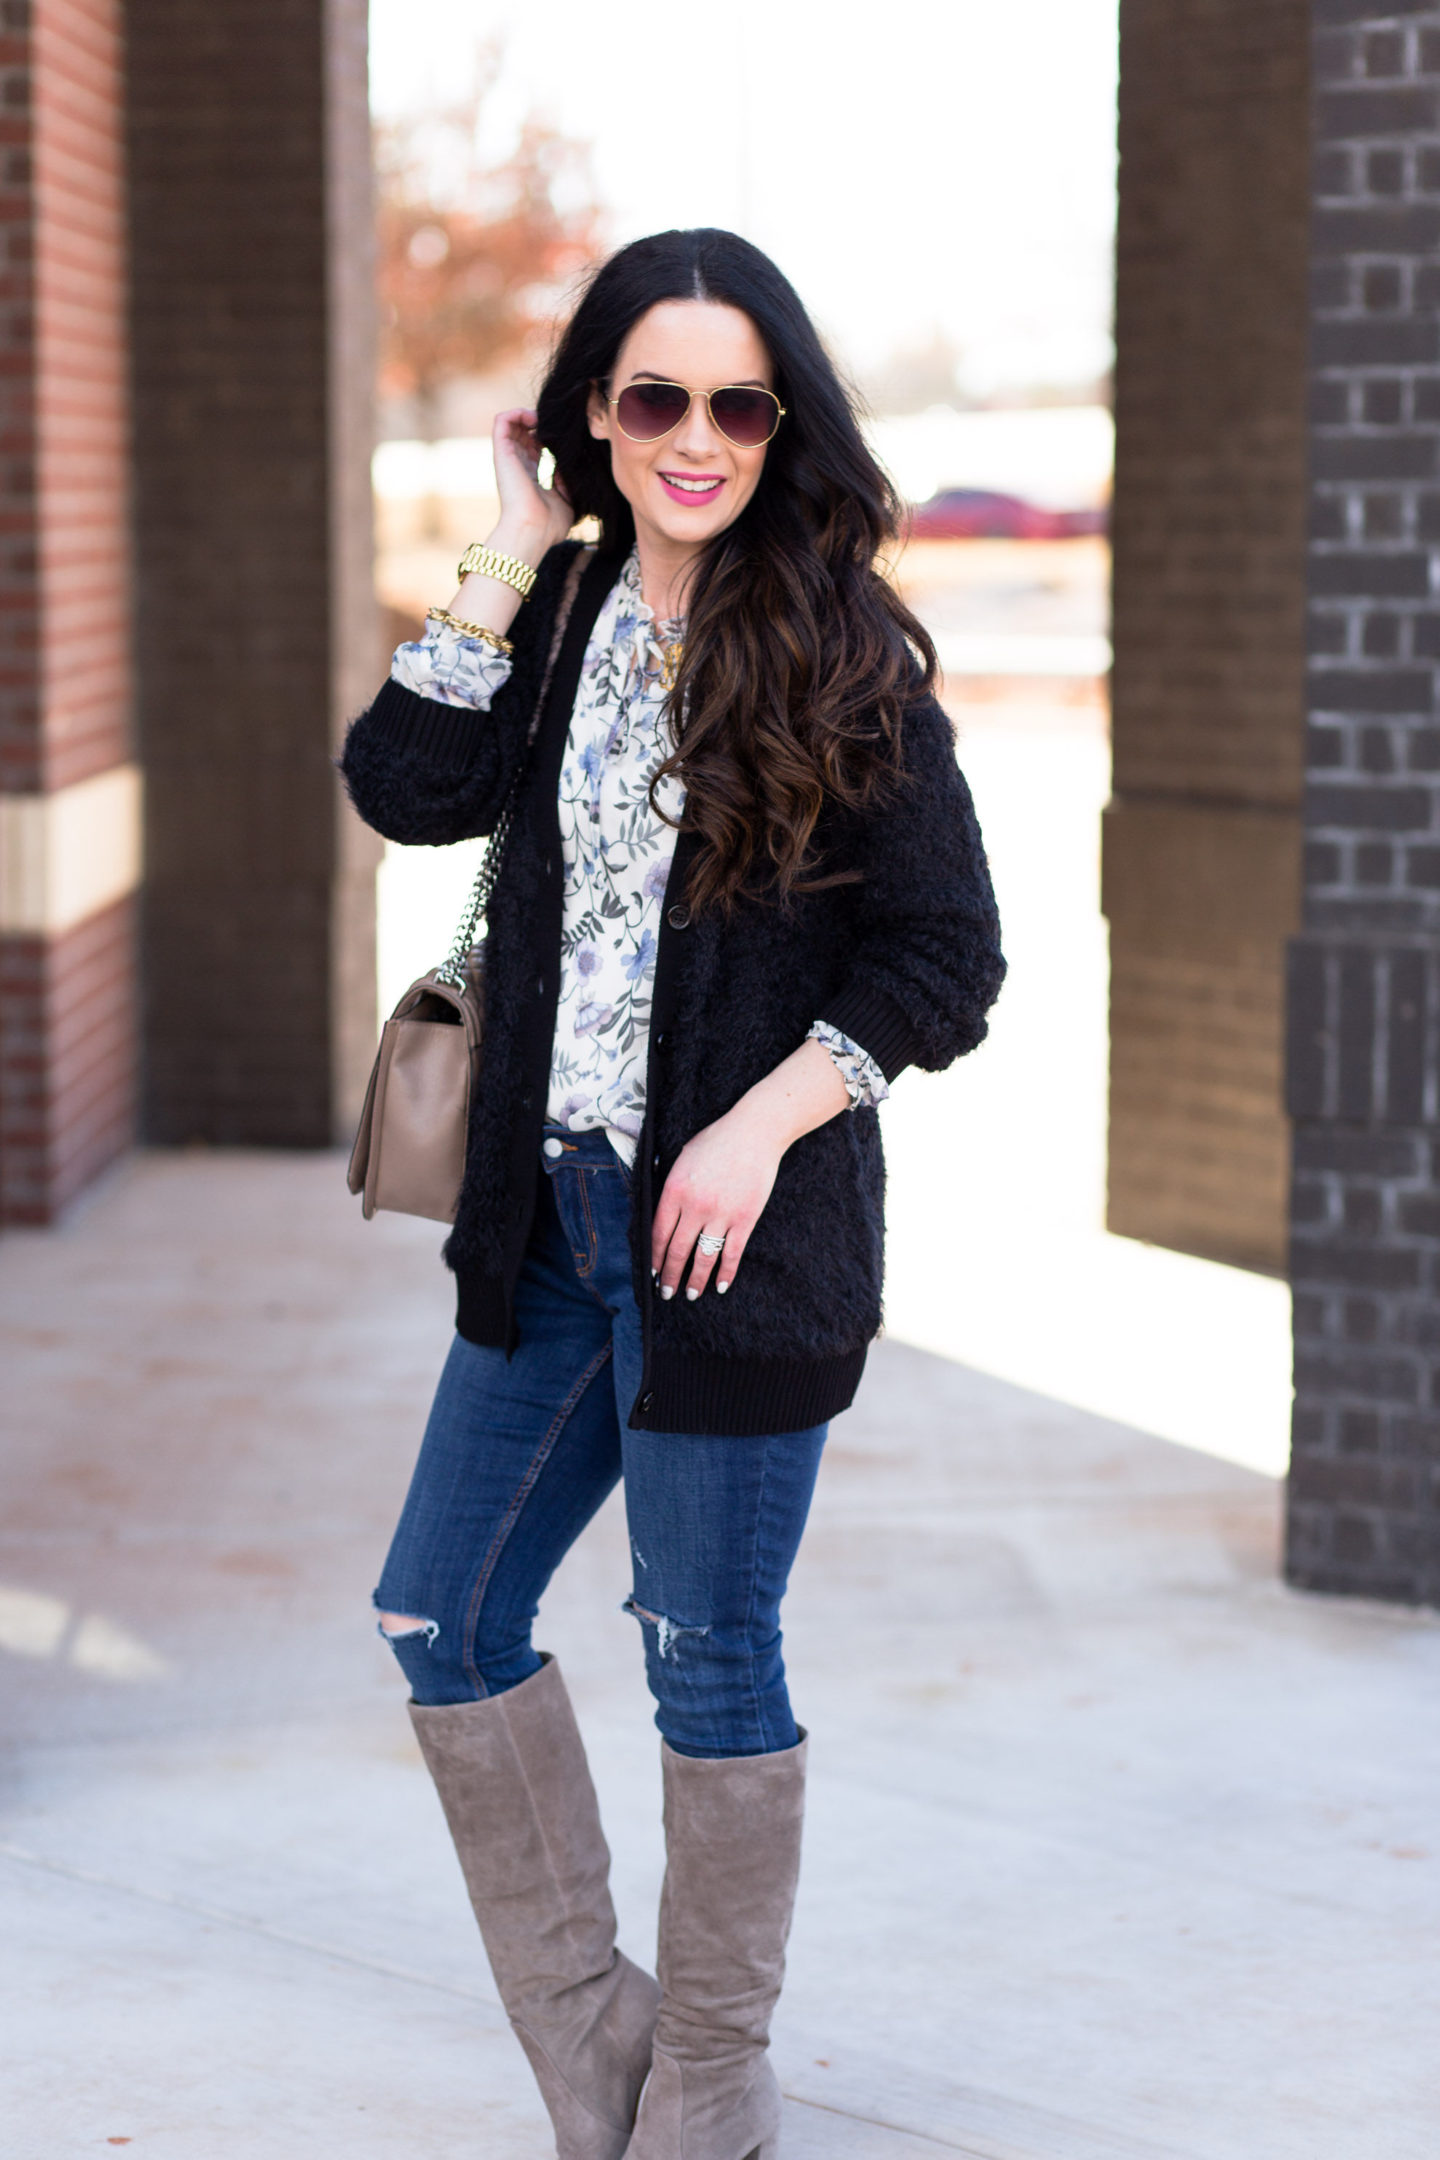 Winter Florals + Suede Boots - The Double Take Girls